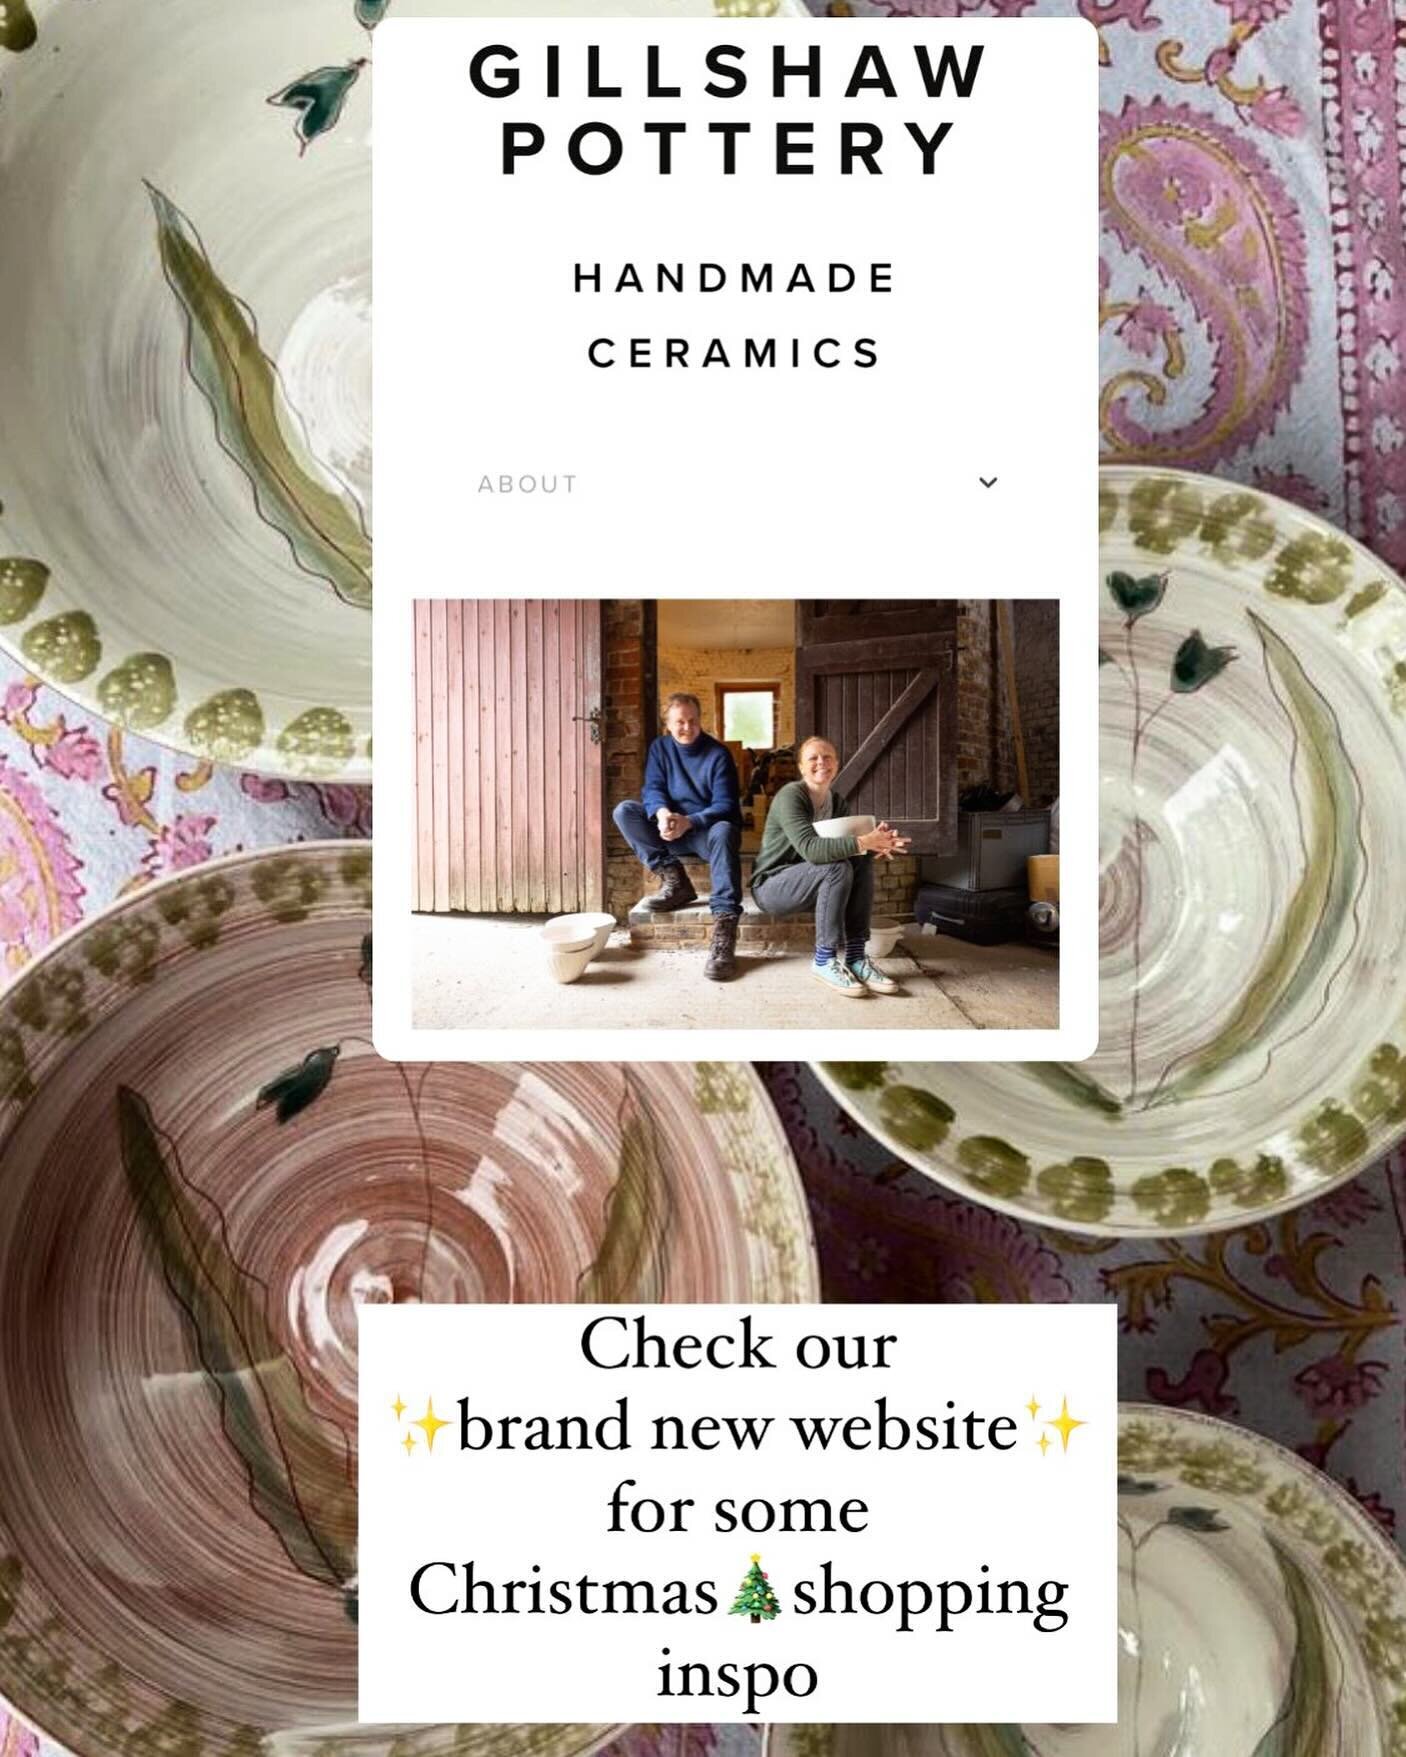 Our new website www.gillshawpottery.co.uk is open. We are extremely excited. Please do browse through our range of products and enjoy some Christmas shopping. 🎄 10% OFF any order until 2nd December with DISCOUNT10🎄  #christmasshopping #ceramics #po